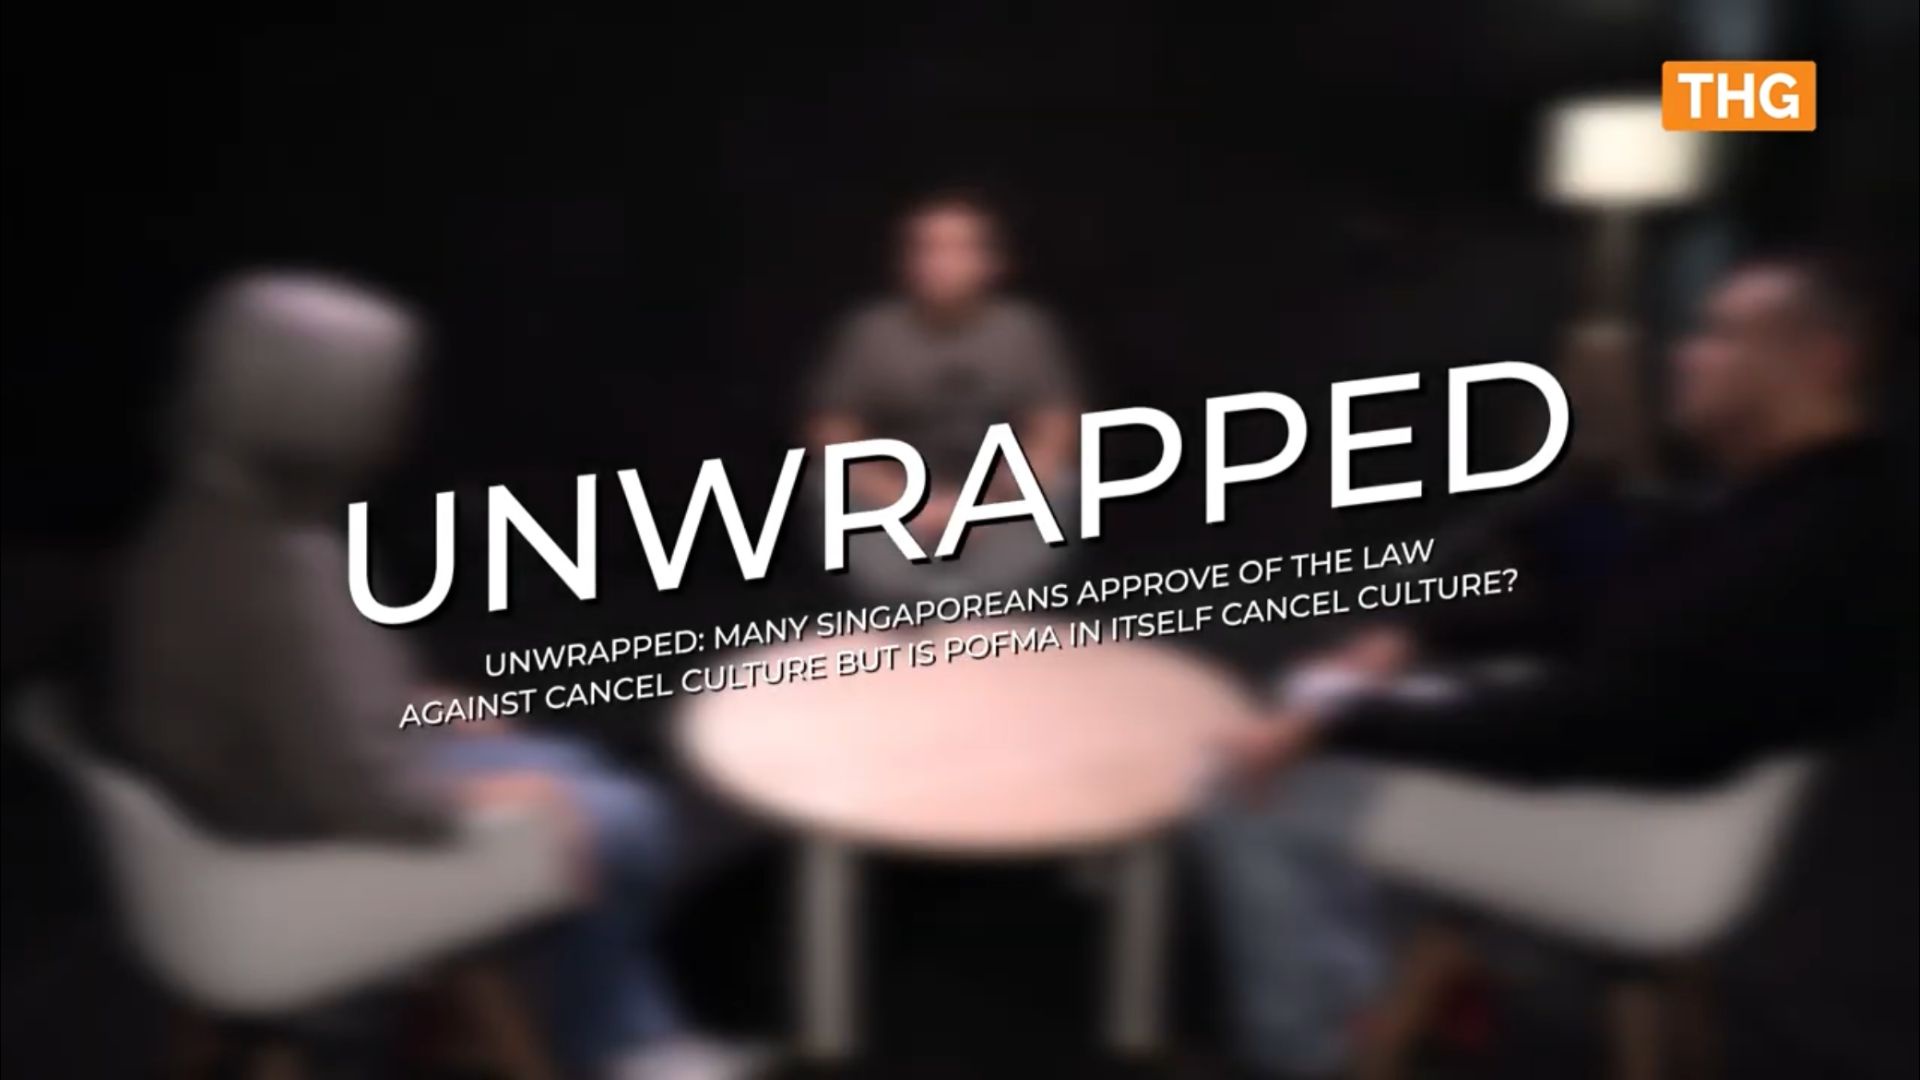 Unwrapped: S’pore set law to stop cancel culture but is POFMA cancel culture? featured image